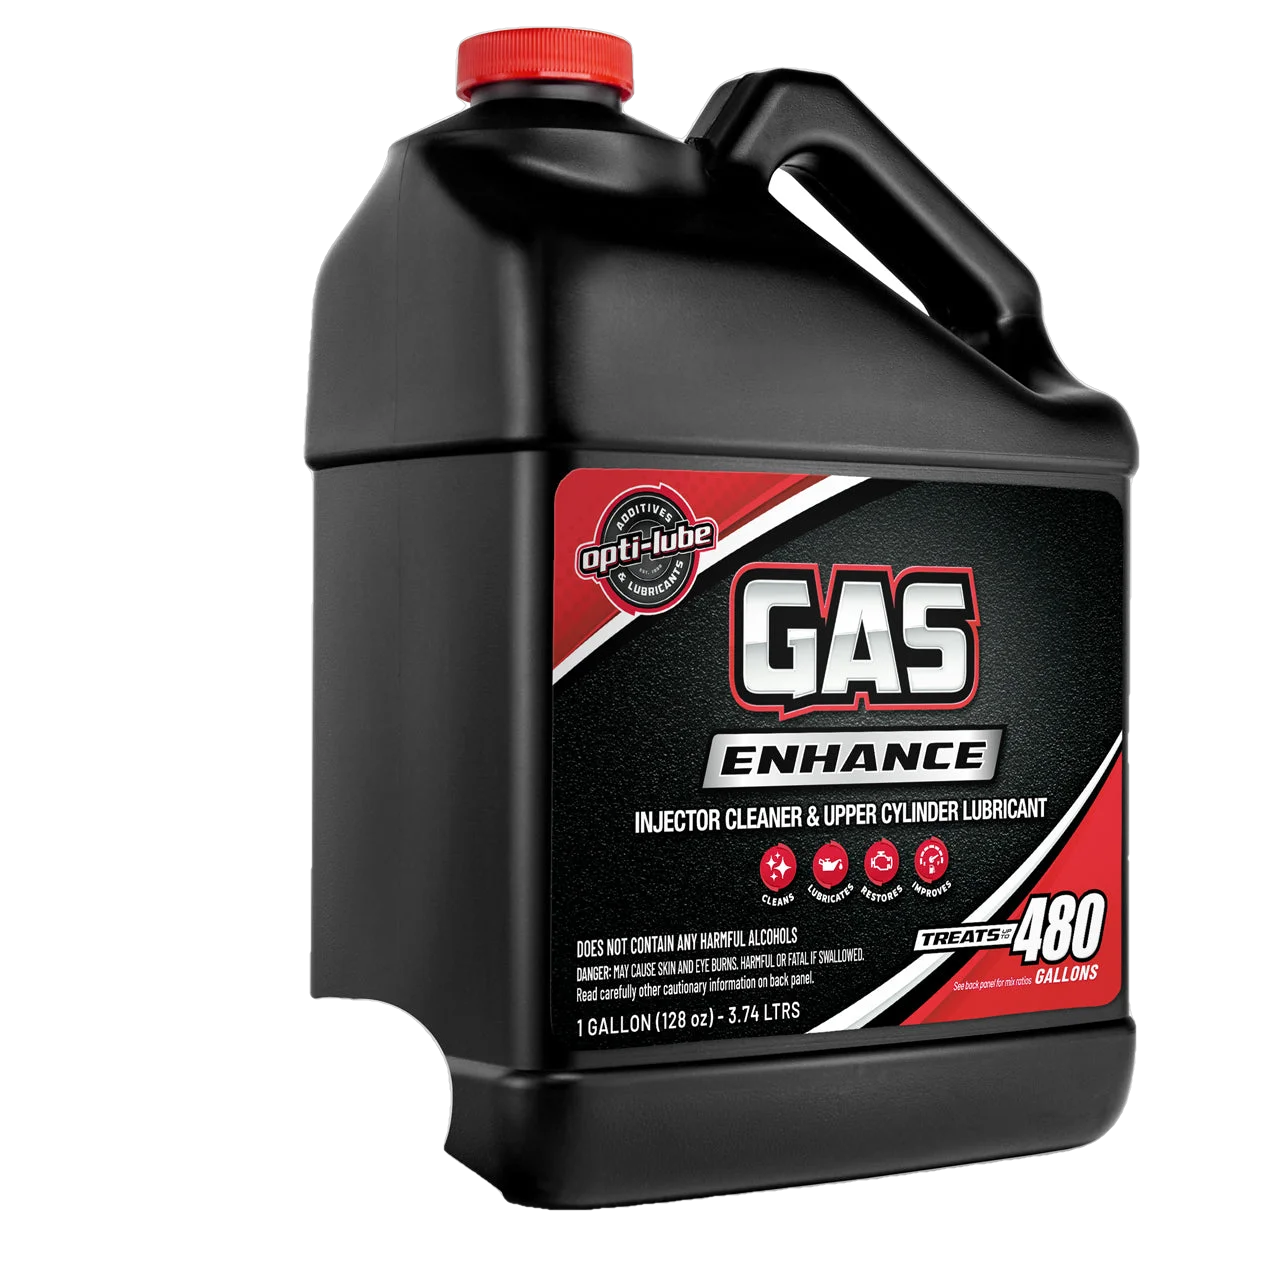 Opti-Lube Gas Enhance Fuel Additive: 1 Gallon with Spigot, Treats Up To 480 Gallons of Gasoline